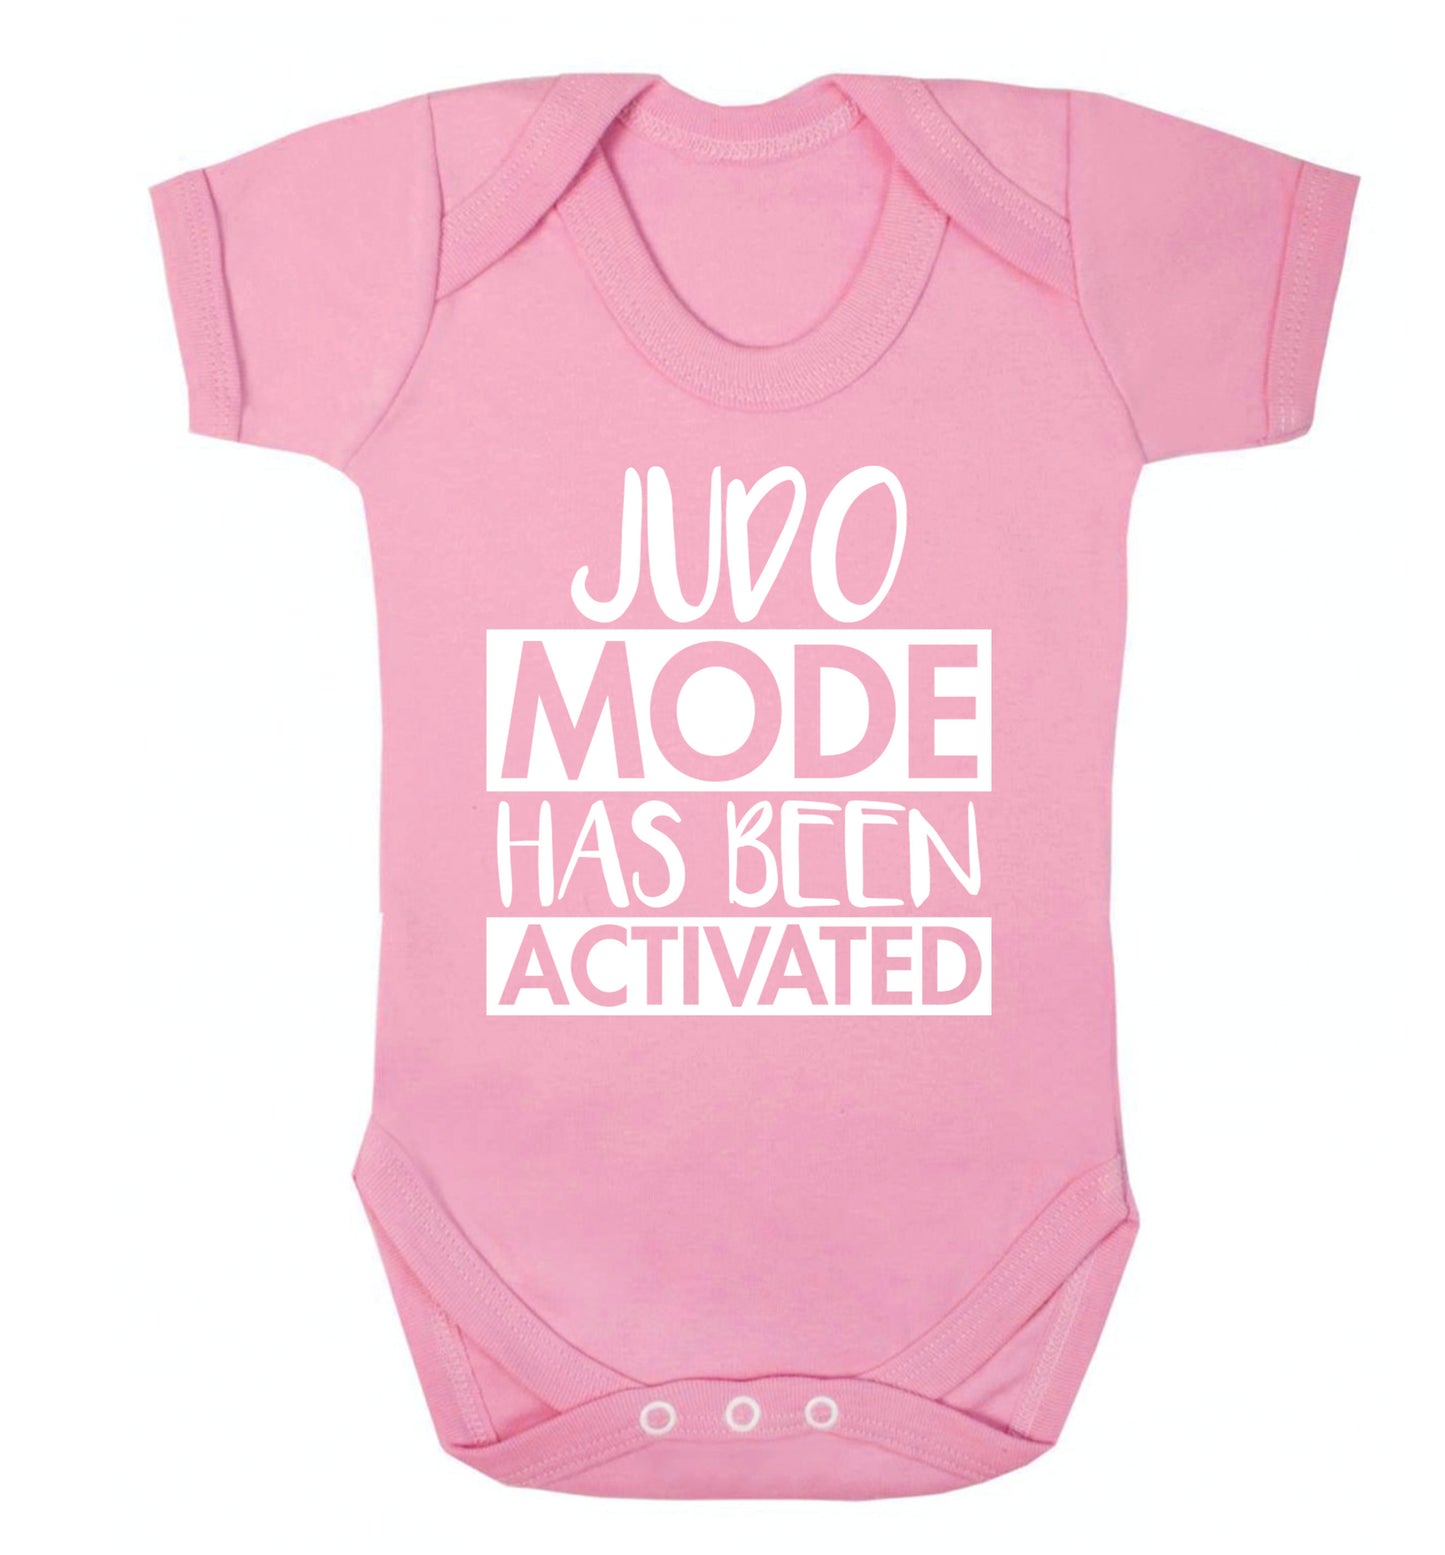 Judo mode activated Baby Vest pale pink 18-24 months